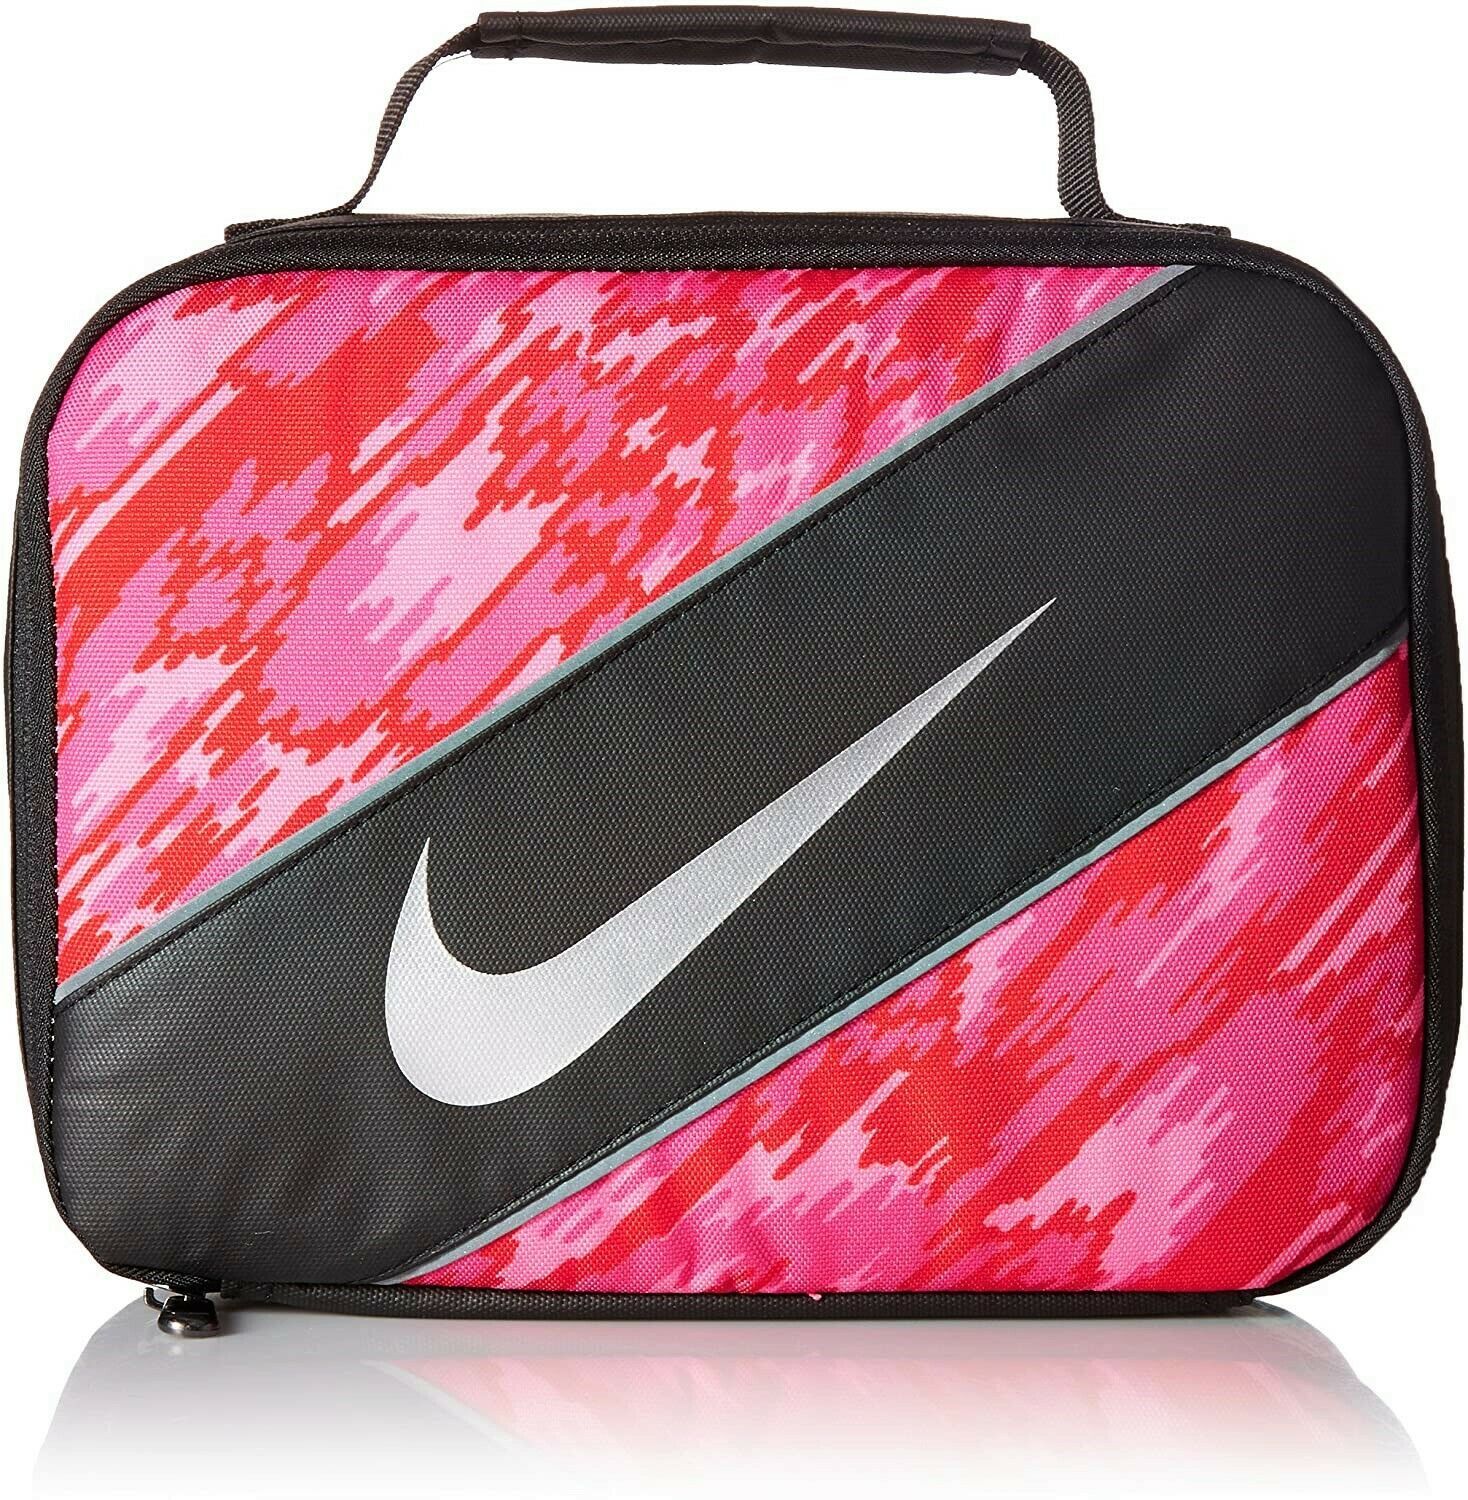 NIKE Pink Black Youth /Adult BPA Lead-Free Insulated Lunch Box Tote Bag NWT $20